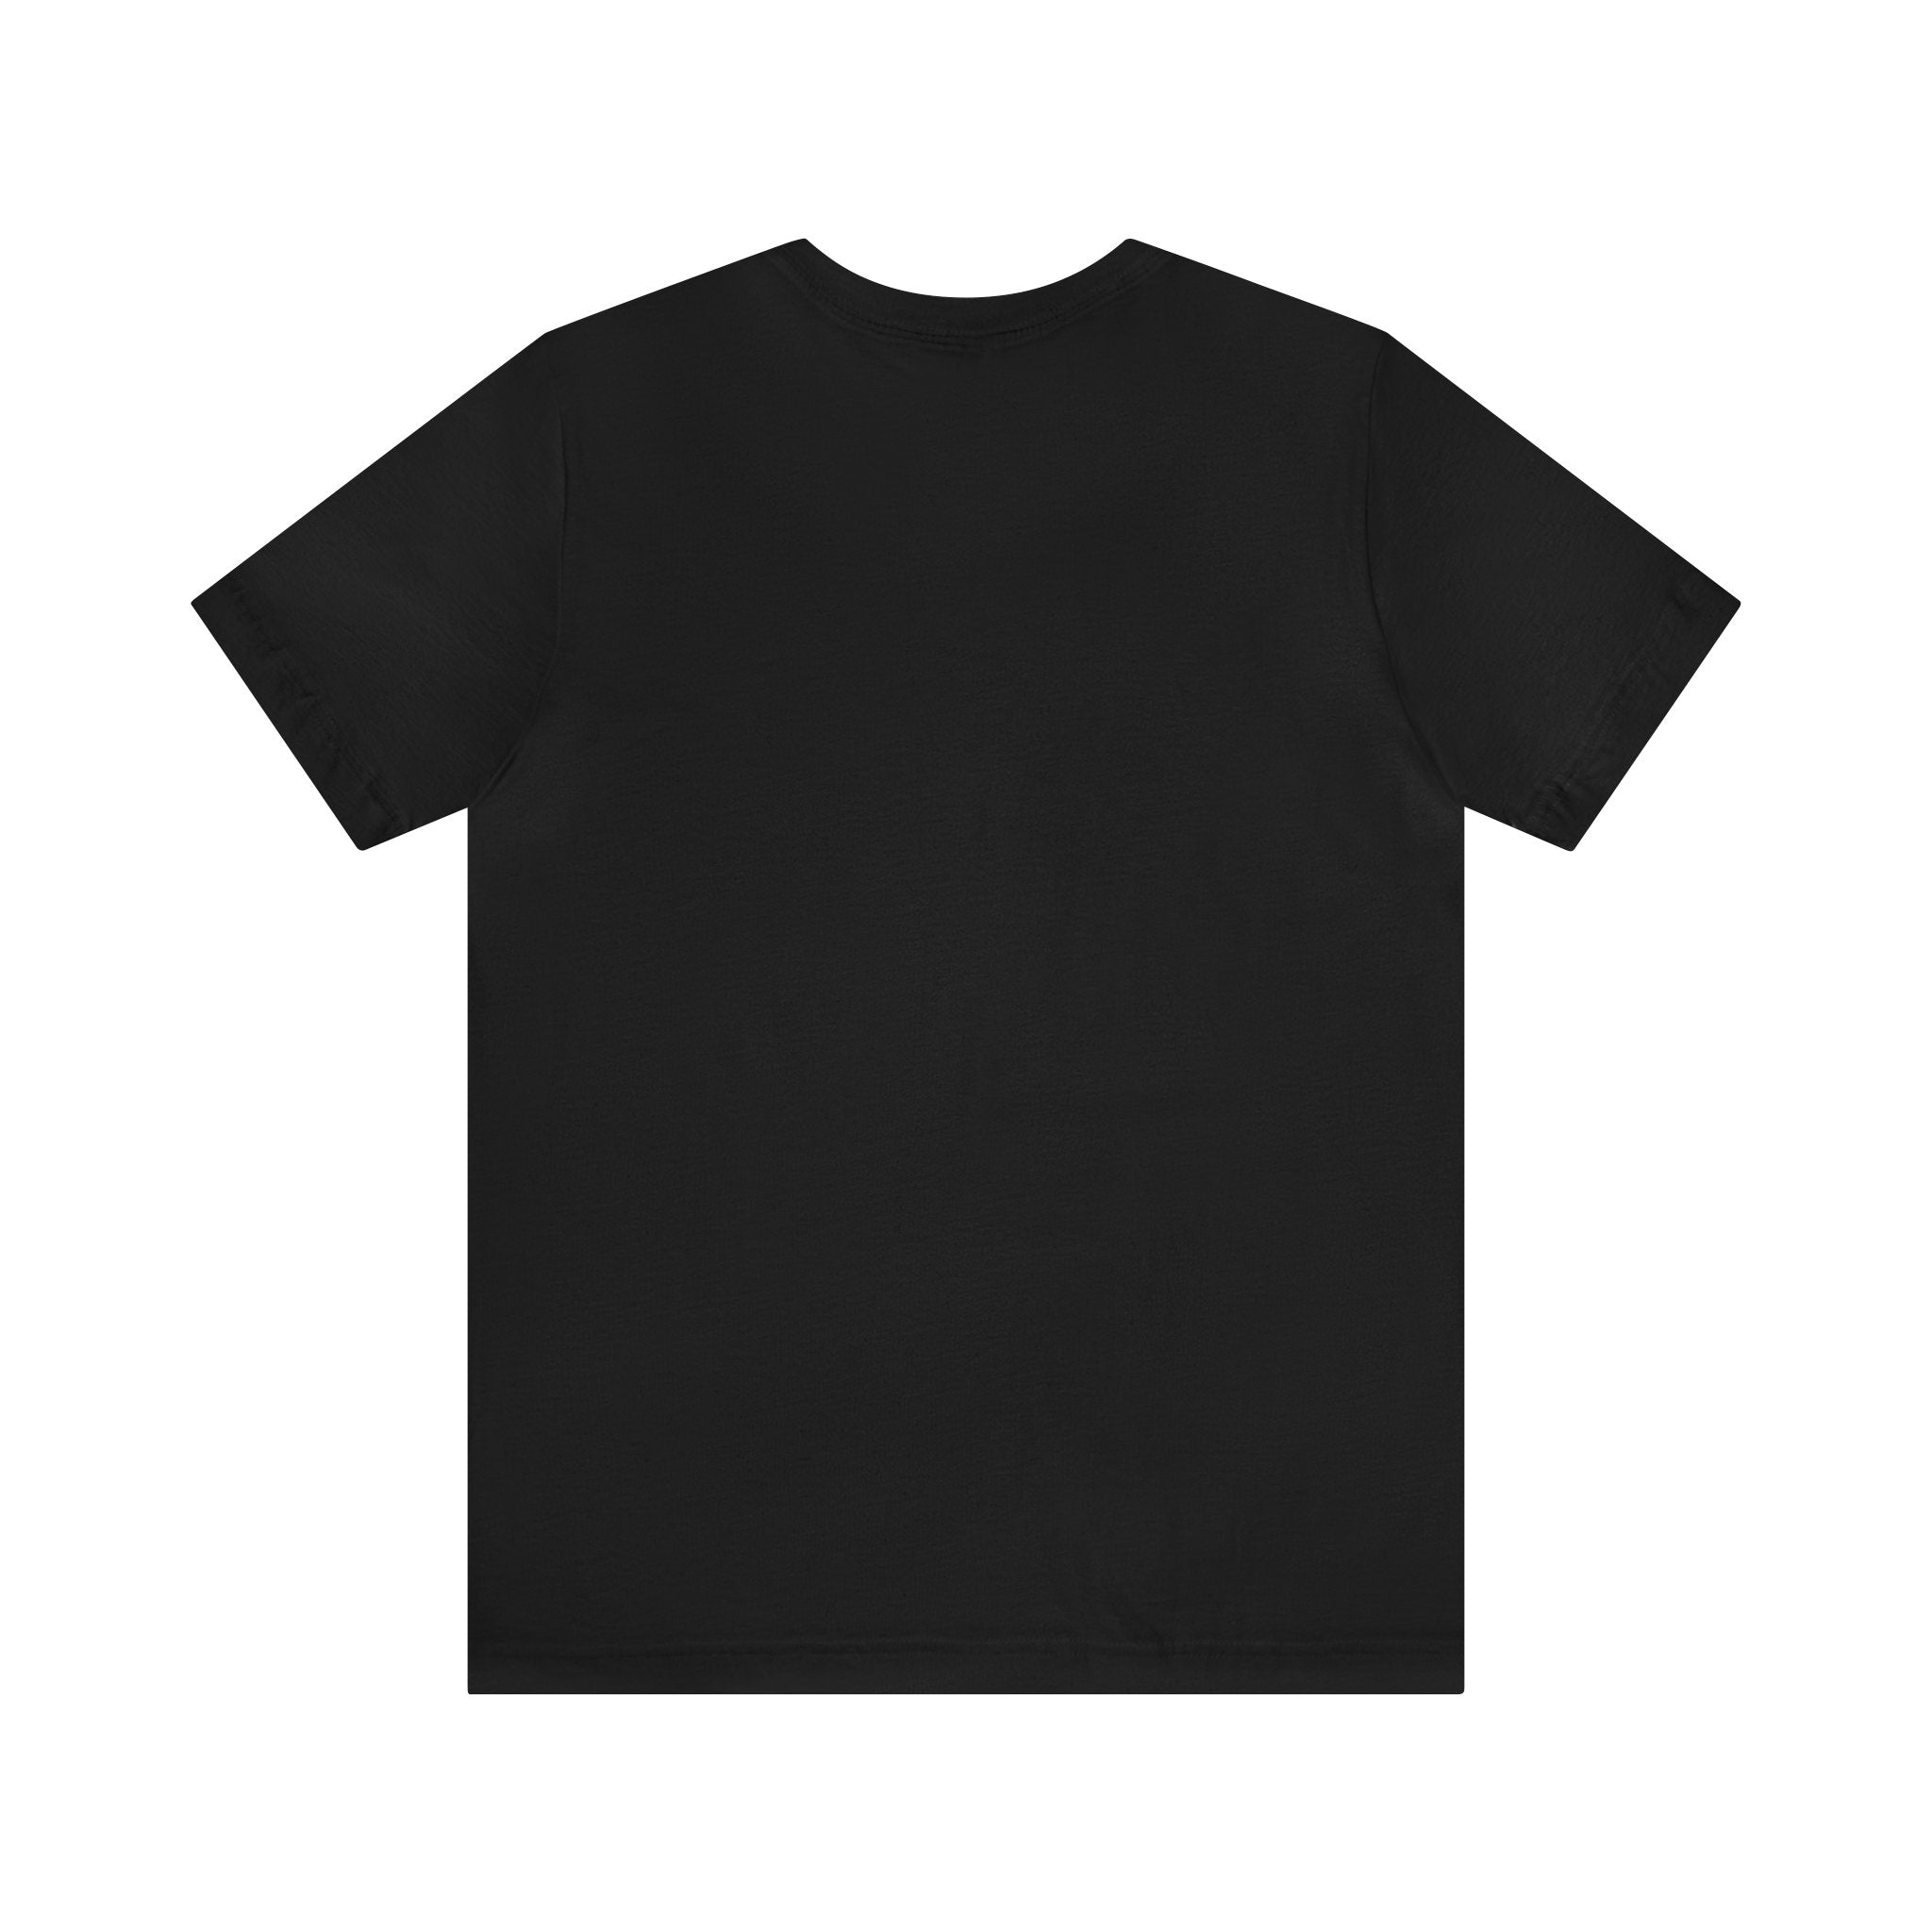 Order now for a black Granny T-shirt on a white background.